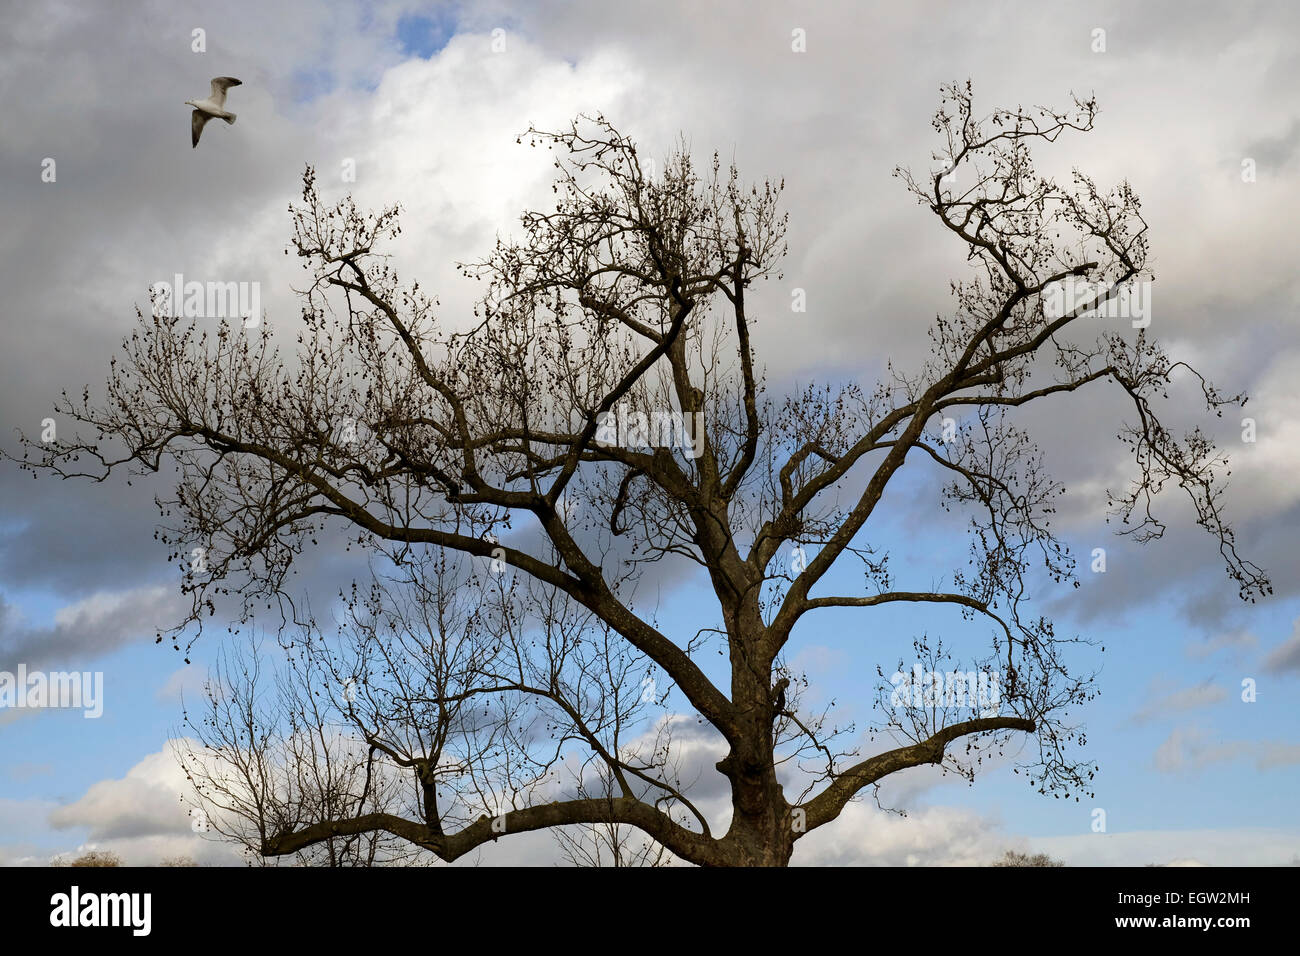 A seagull flying over a tree in Hyde park, London Stock Photo